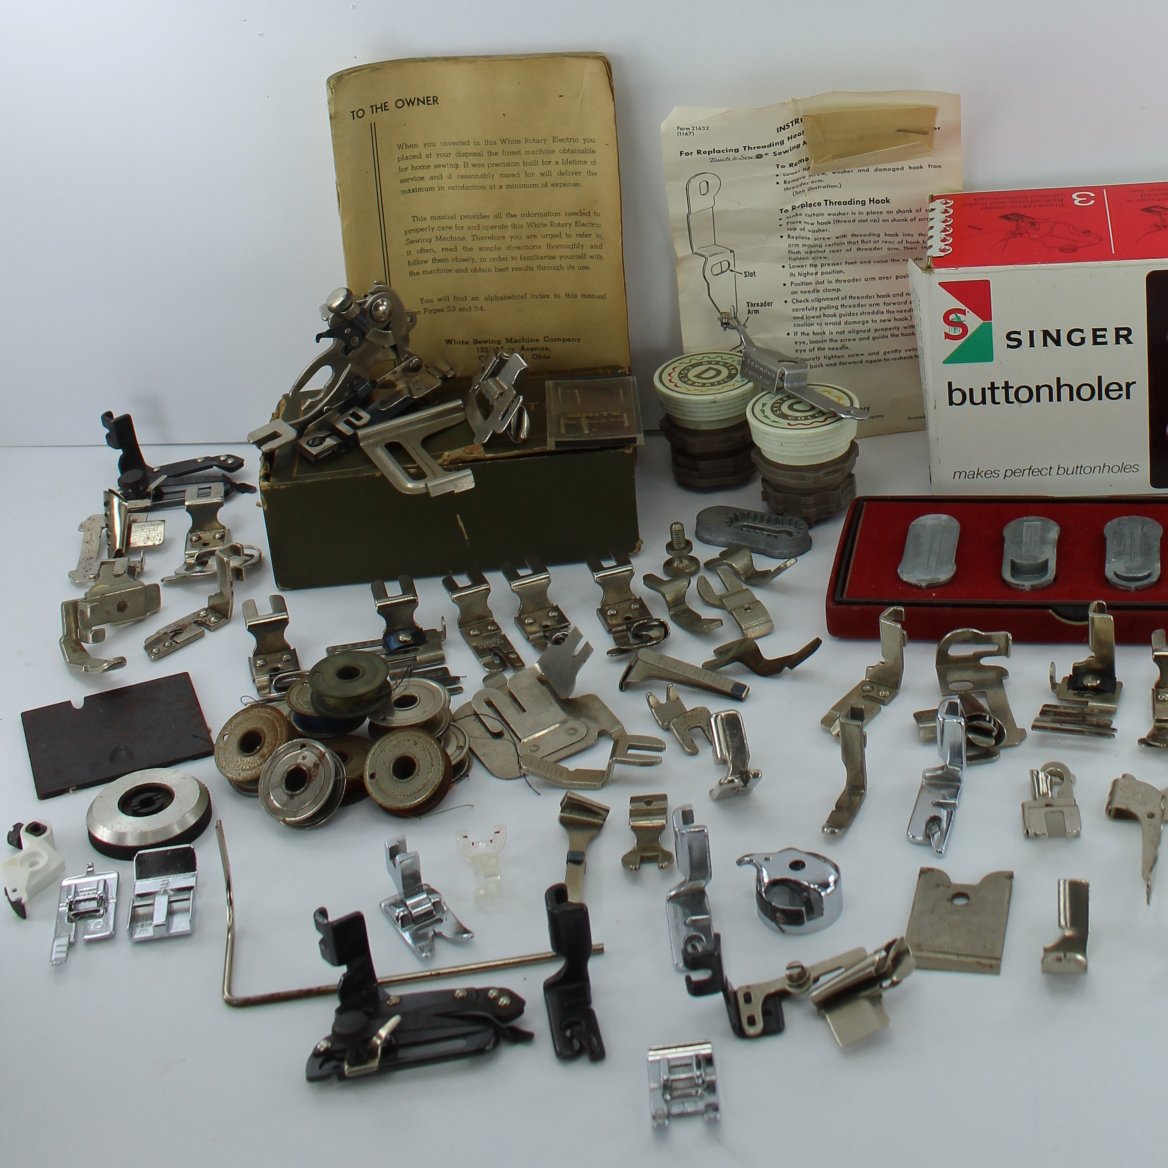 Lot 90 Sewing Machine Attachments Bobbins Buttonholers Misc. Singer Si